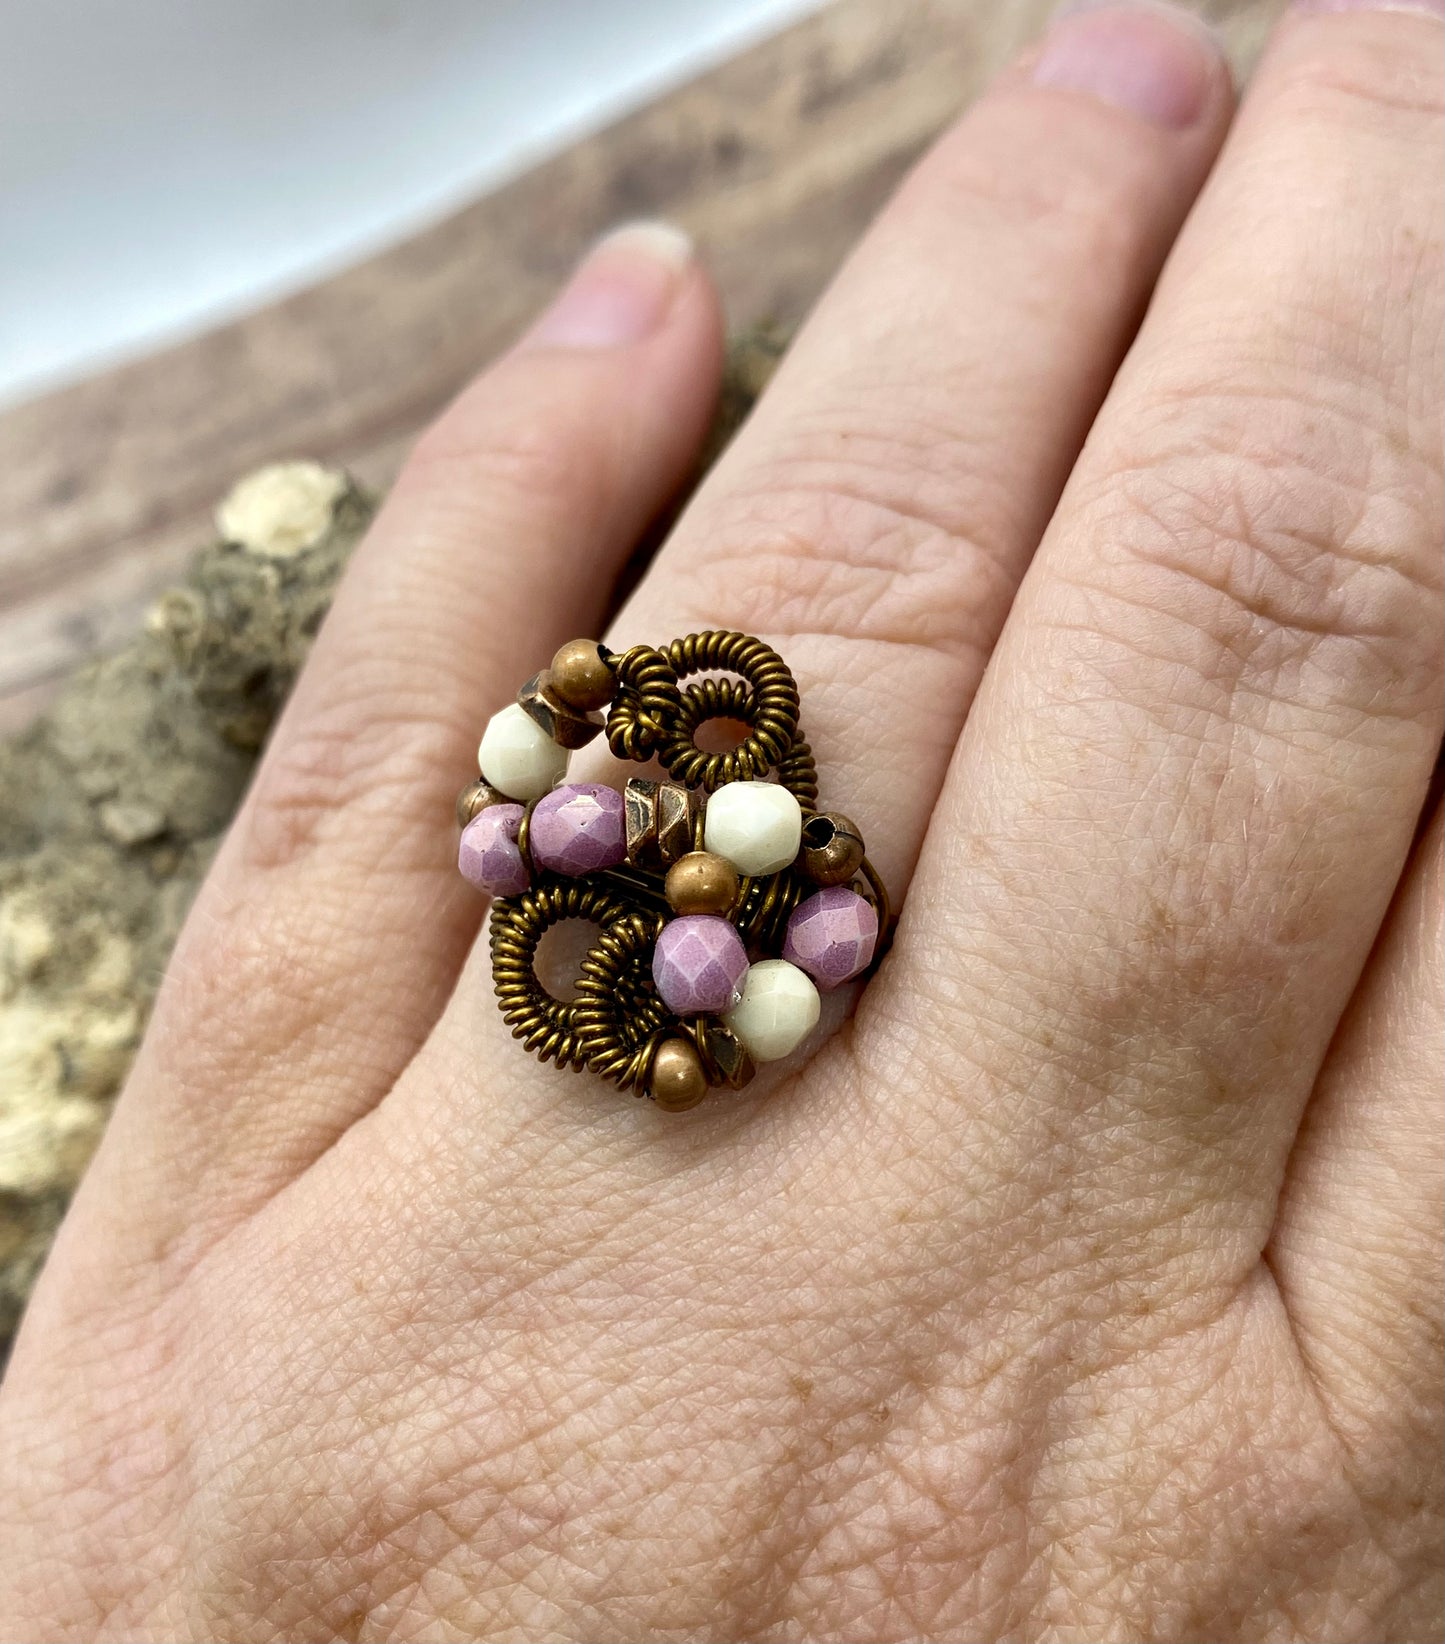 Size 10 handcrafted ring item #1123-03